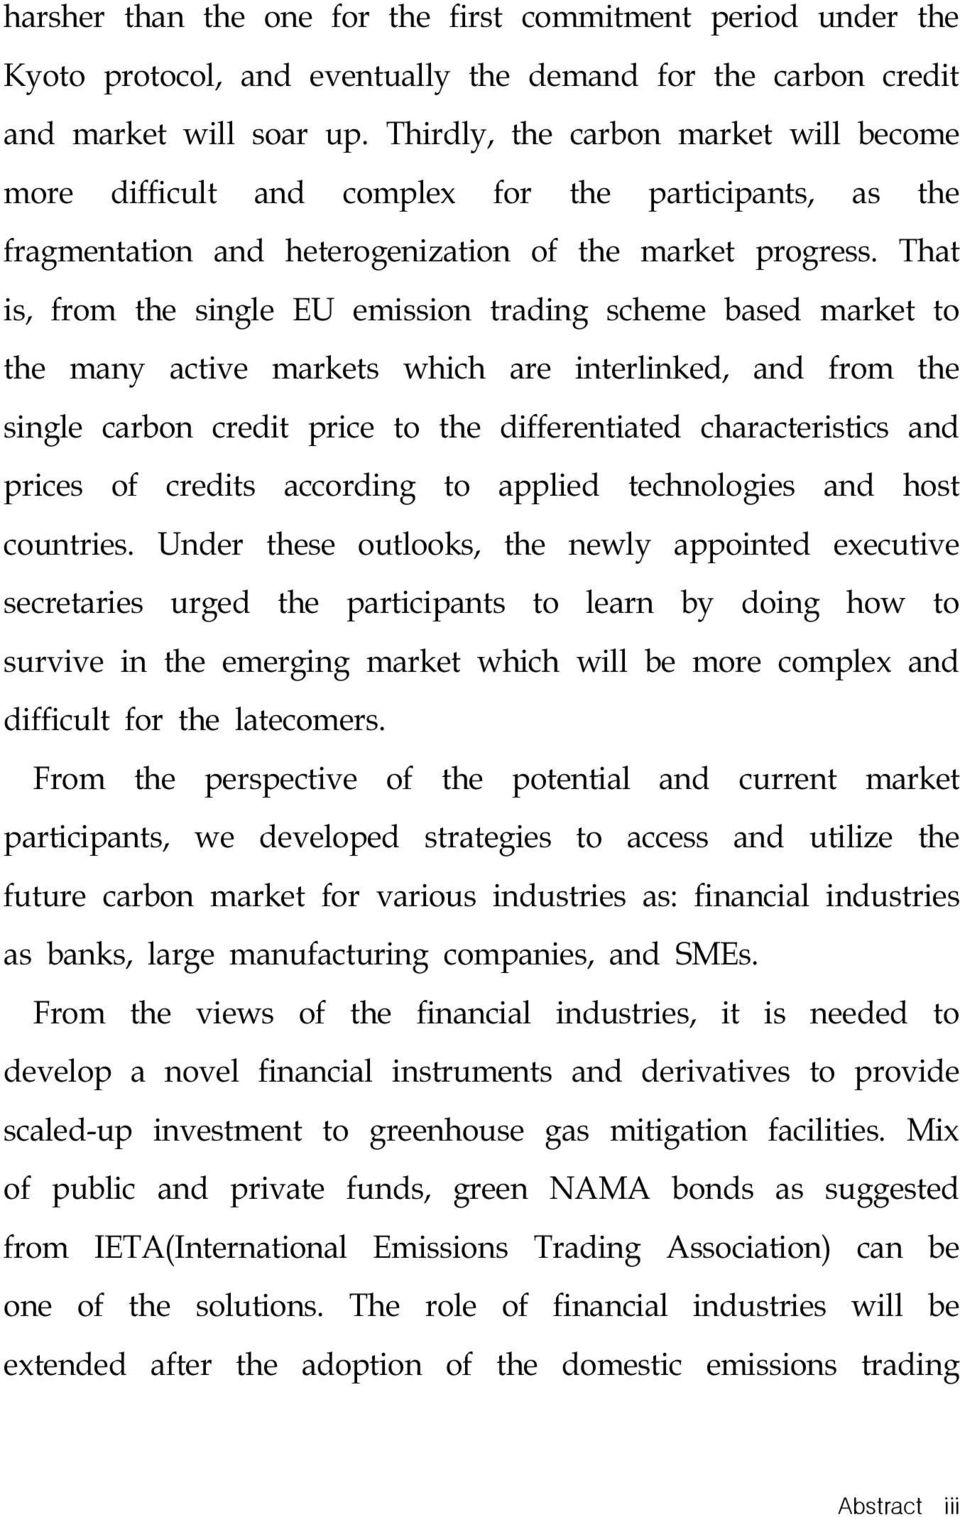 That is, from the single EU emission trading scheme based market to the many active markets which are interlinked, and from the single carbon credit price to the differentiated characteristics and